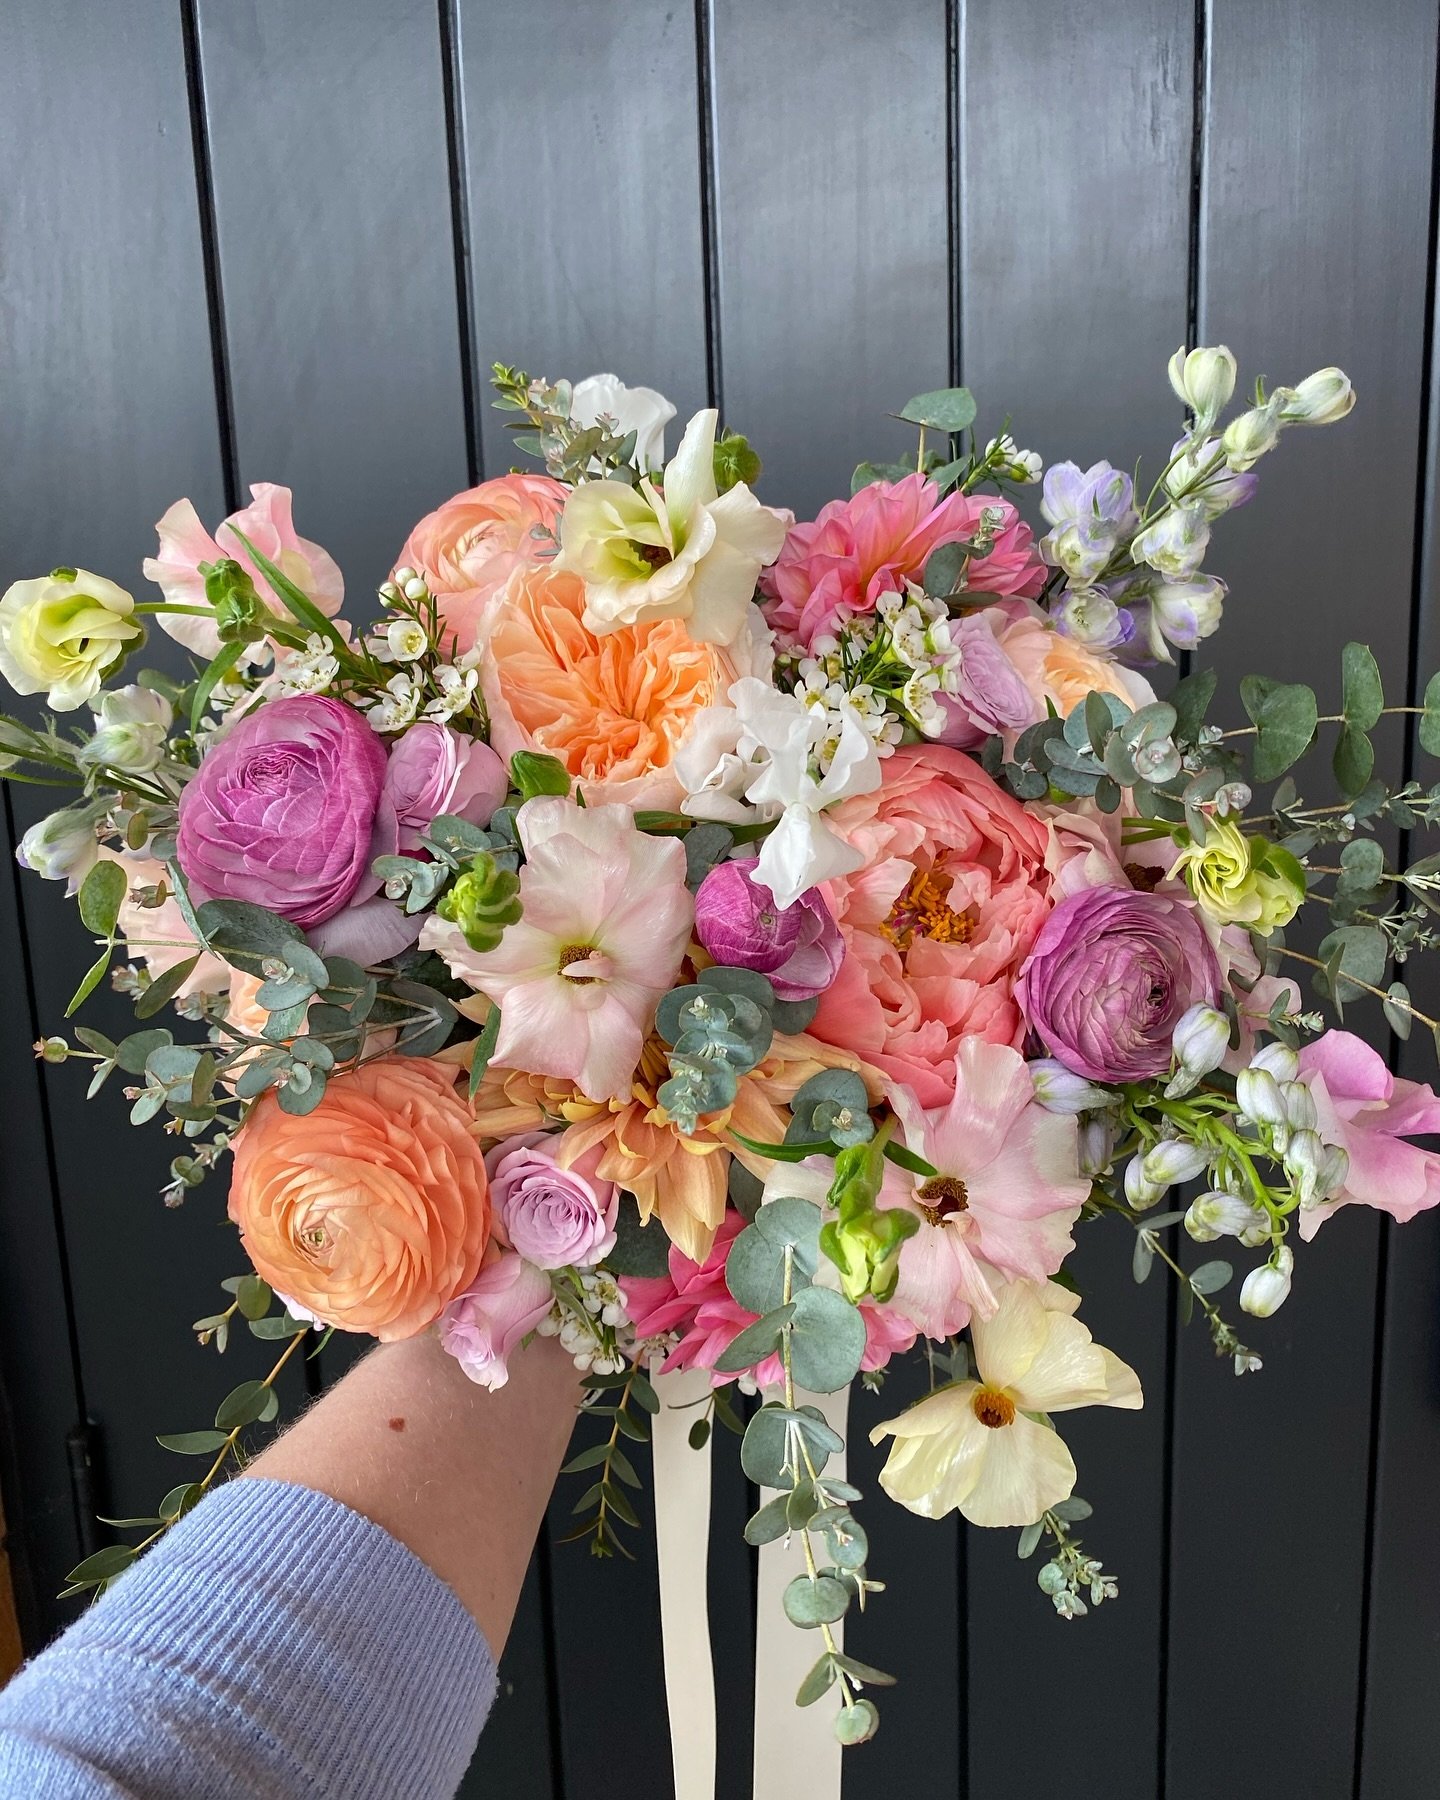 Loved Effie&rsquo;s wedding bouquet whom married last weekend at the beautiful @barnsandyard Lots more to share but had to give the bouquet a post of its own ❤️ Amazing having peonies back, plus Dahlias and Sweetpeas, all the favs 🌸💕